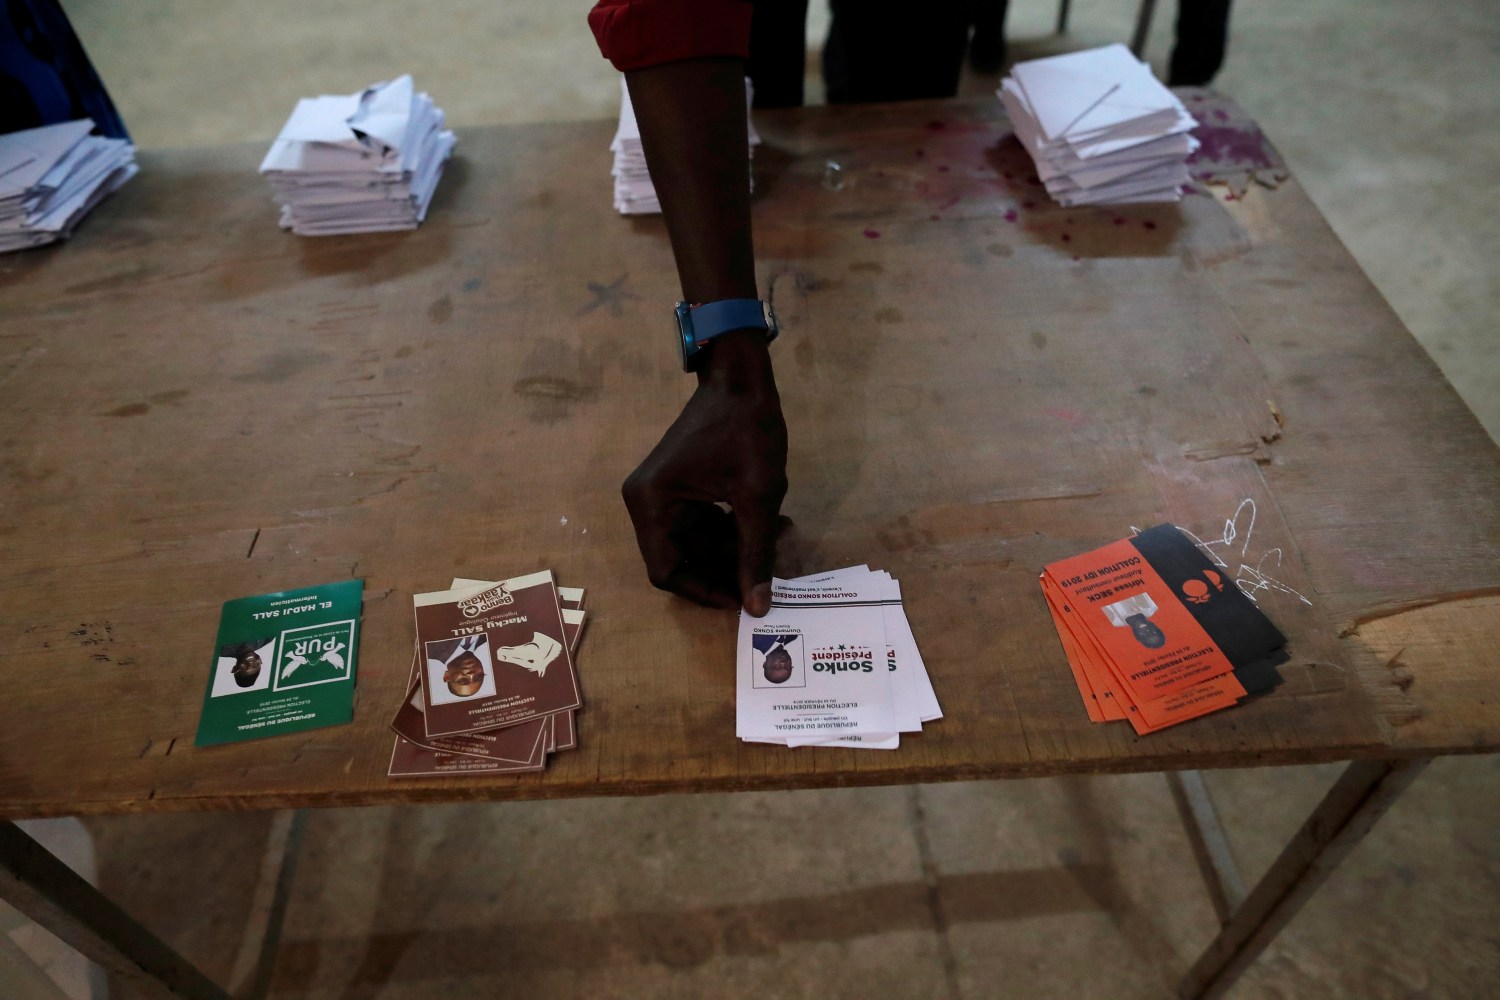 Election workers take part in vote counting during the presidential election in Dakar, Senegal February 24, 2019. REUTERS/Zohra Bensemra - RC17E7C91480